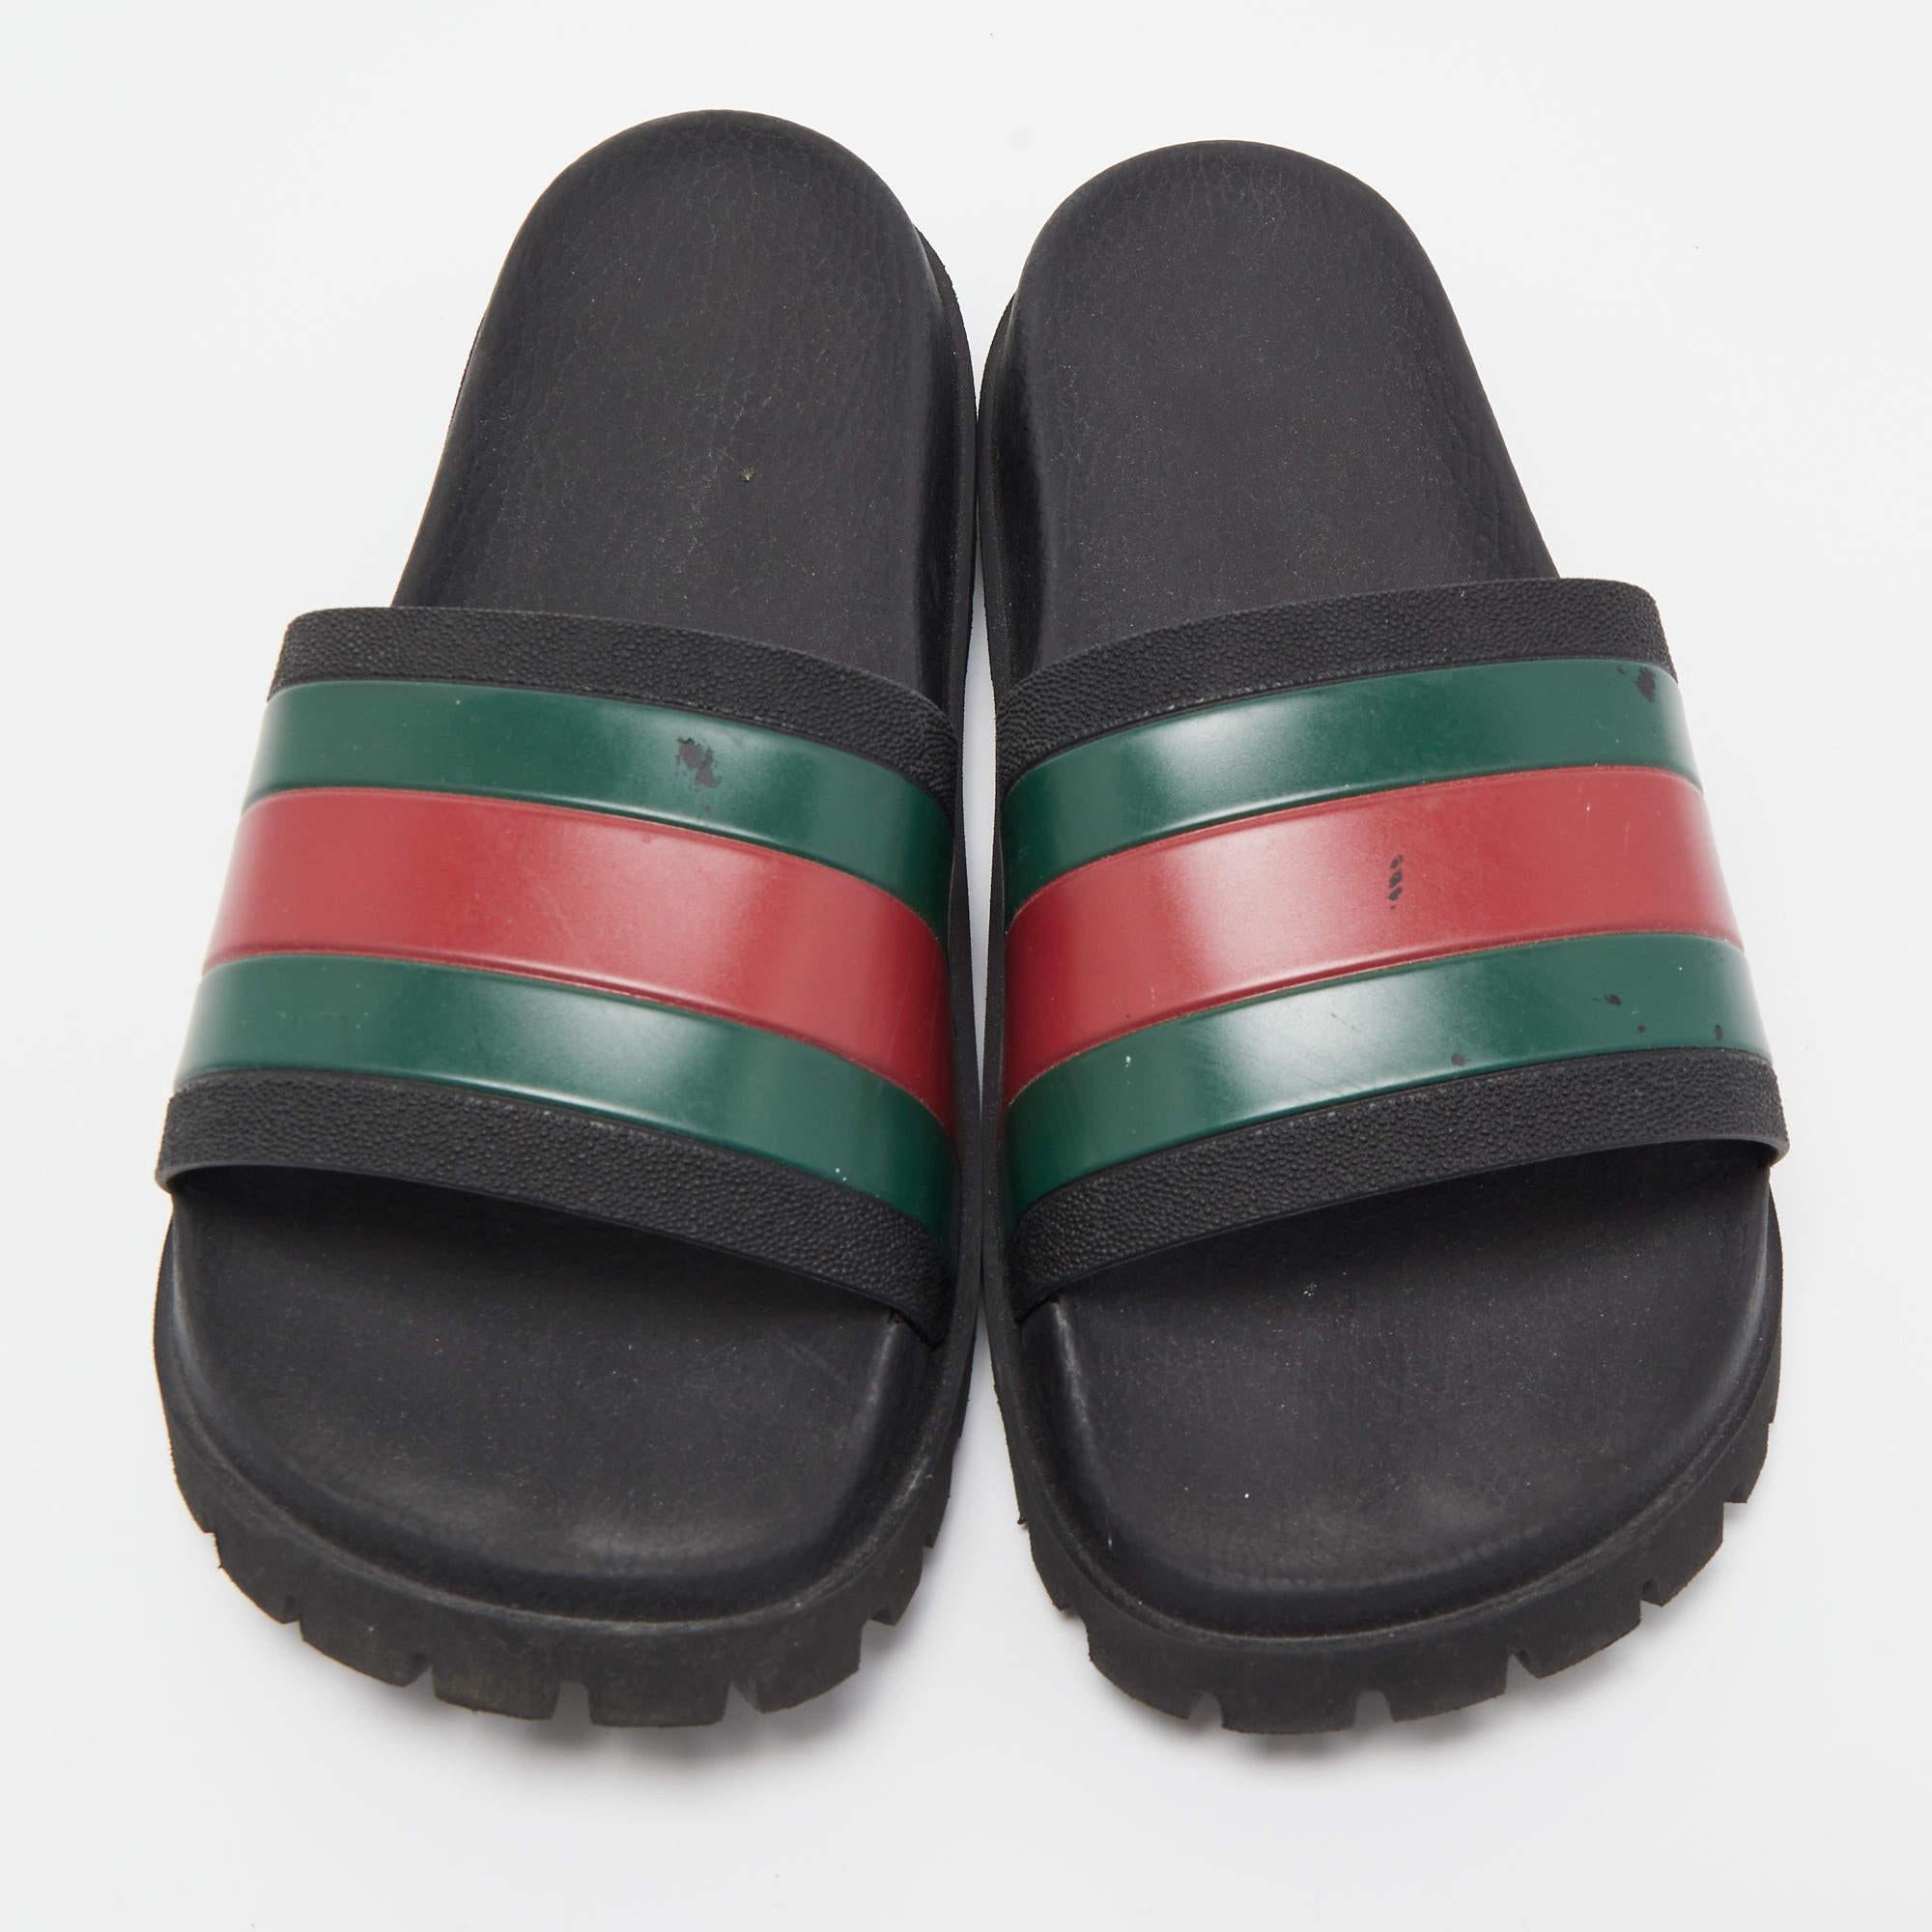 These comfy slides from Gucci are here to add a splendid touch to your casual style. Crafted from rubber, they flaunt the signature Web stripe on the uppers for an unmissable look.

